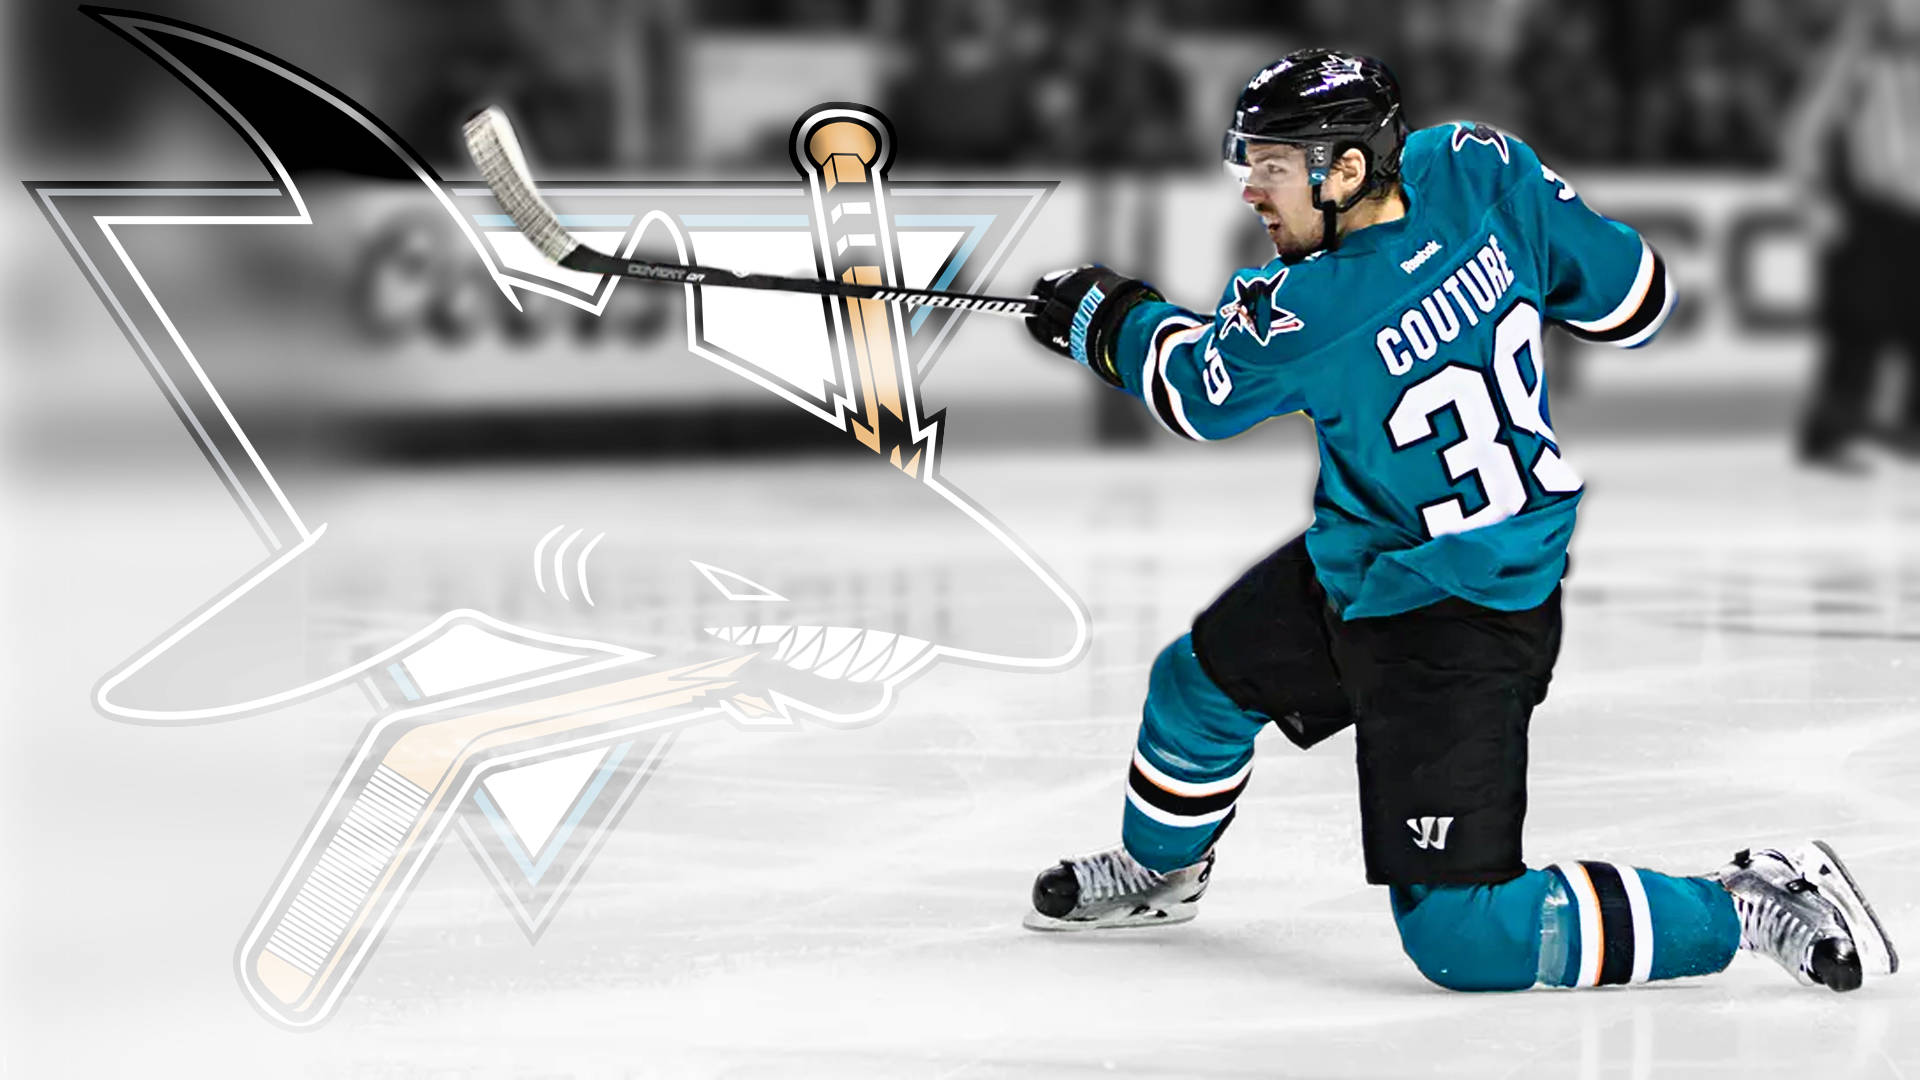 Canadian Professional Ice Hockey Center Logan Couture Logo Poster Background